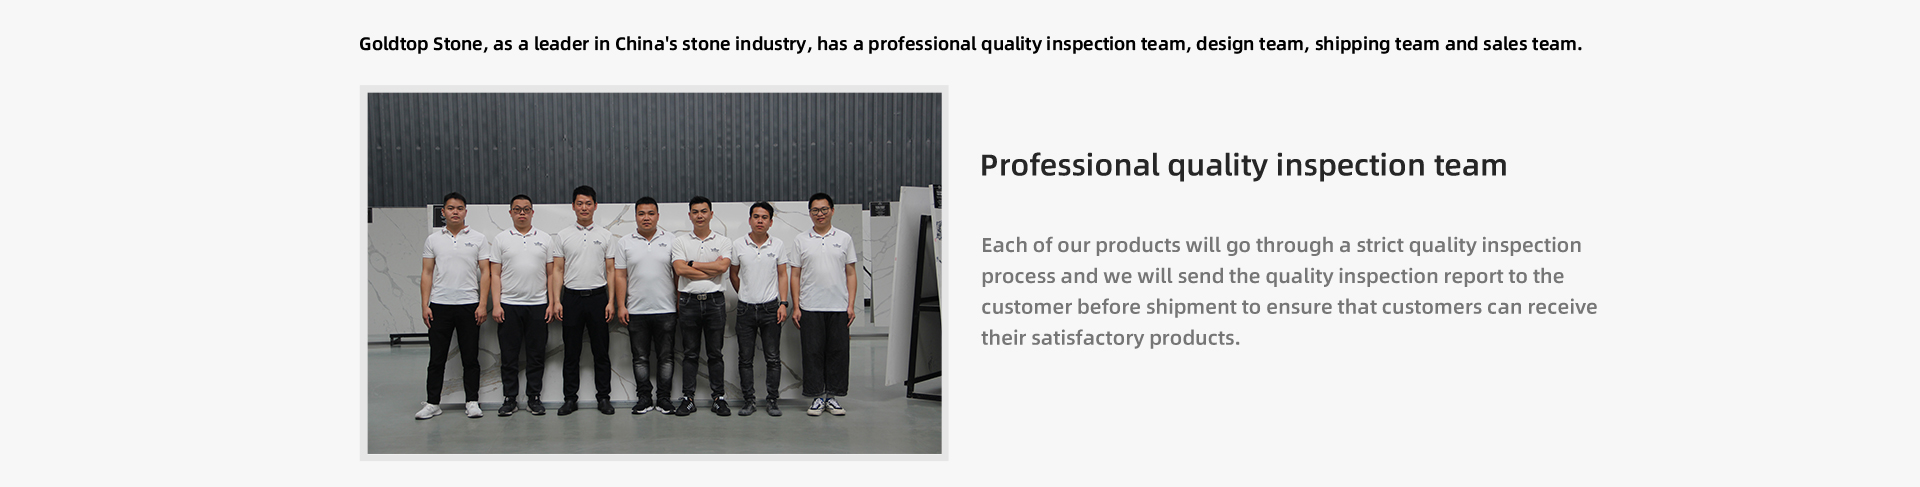 Each of our products will go through a strict quality inspection  process and we will send the quality inspection report to the  customer before shipment to ensure that customers can receive  their satisfactory products.